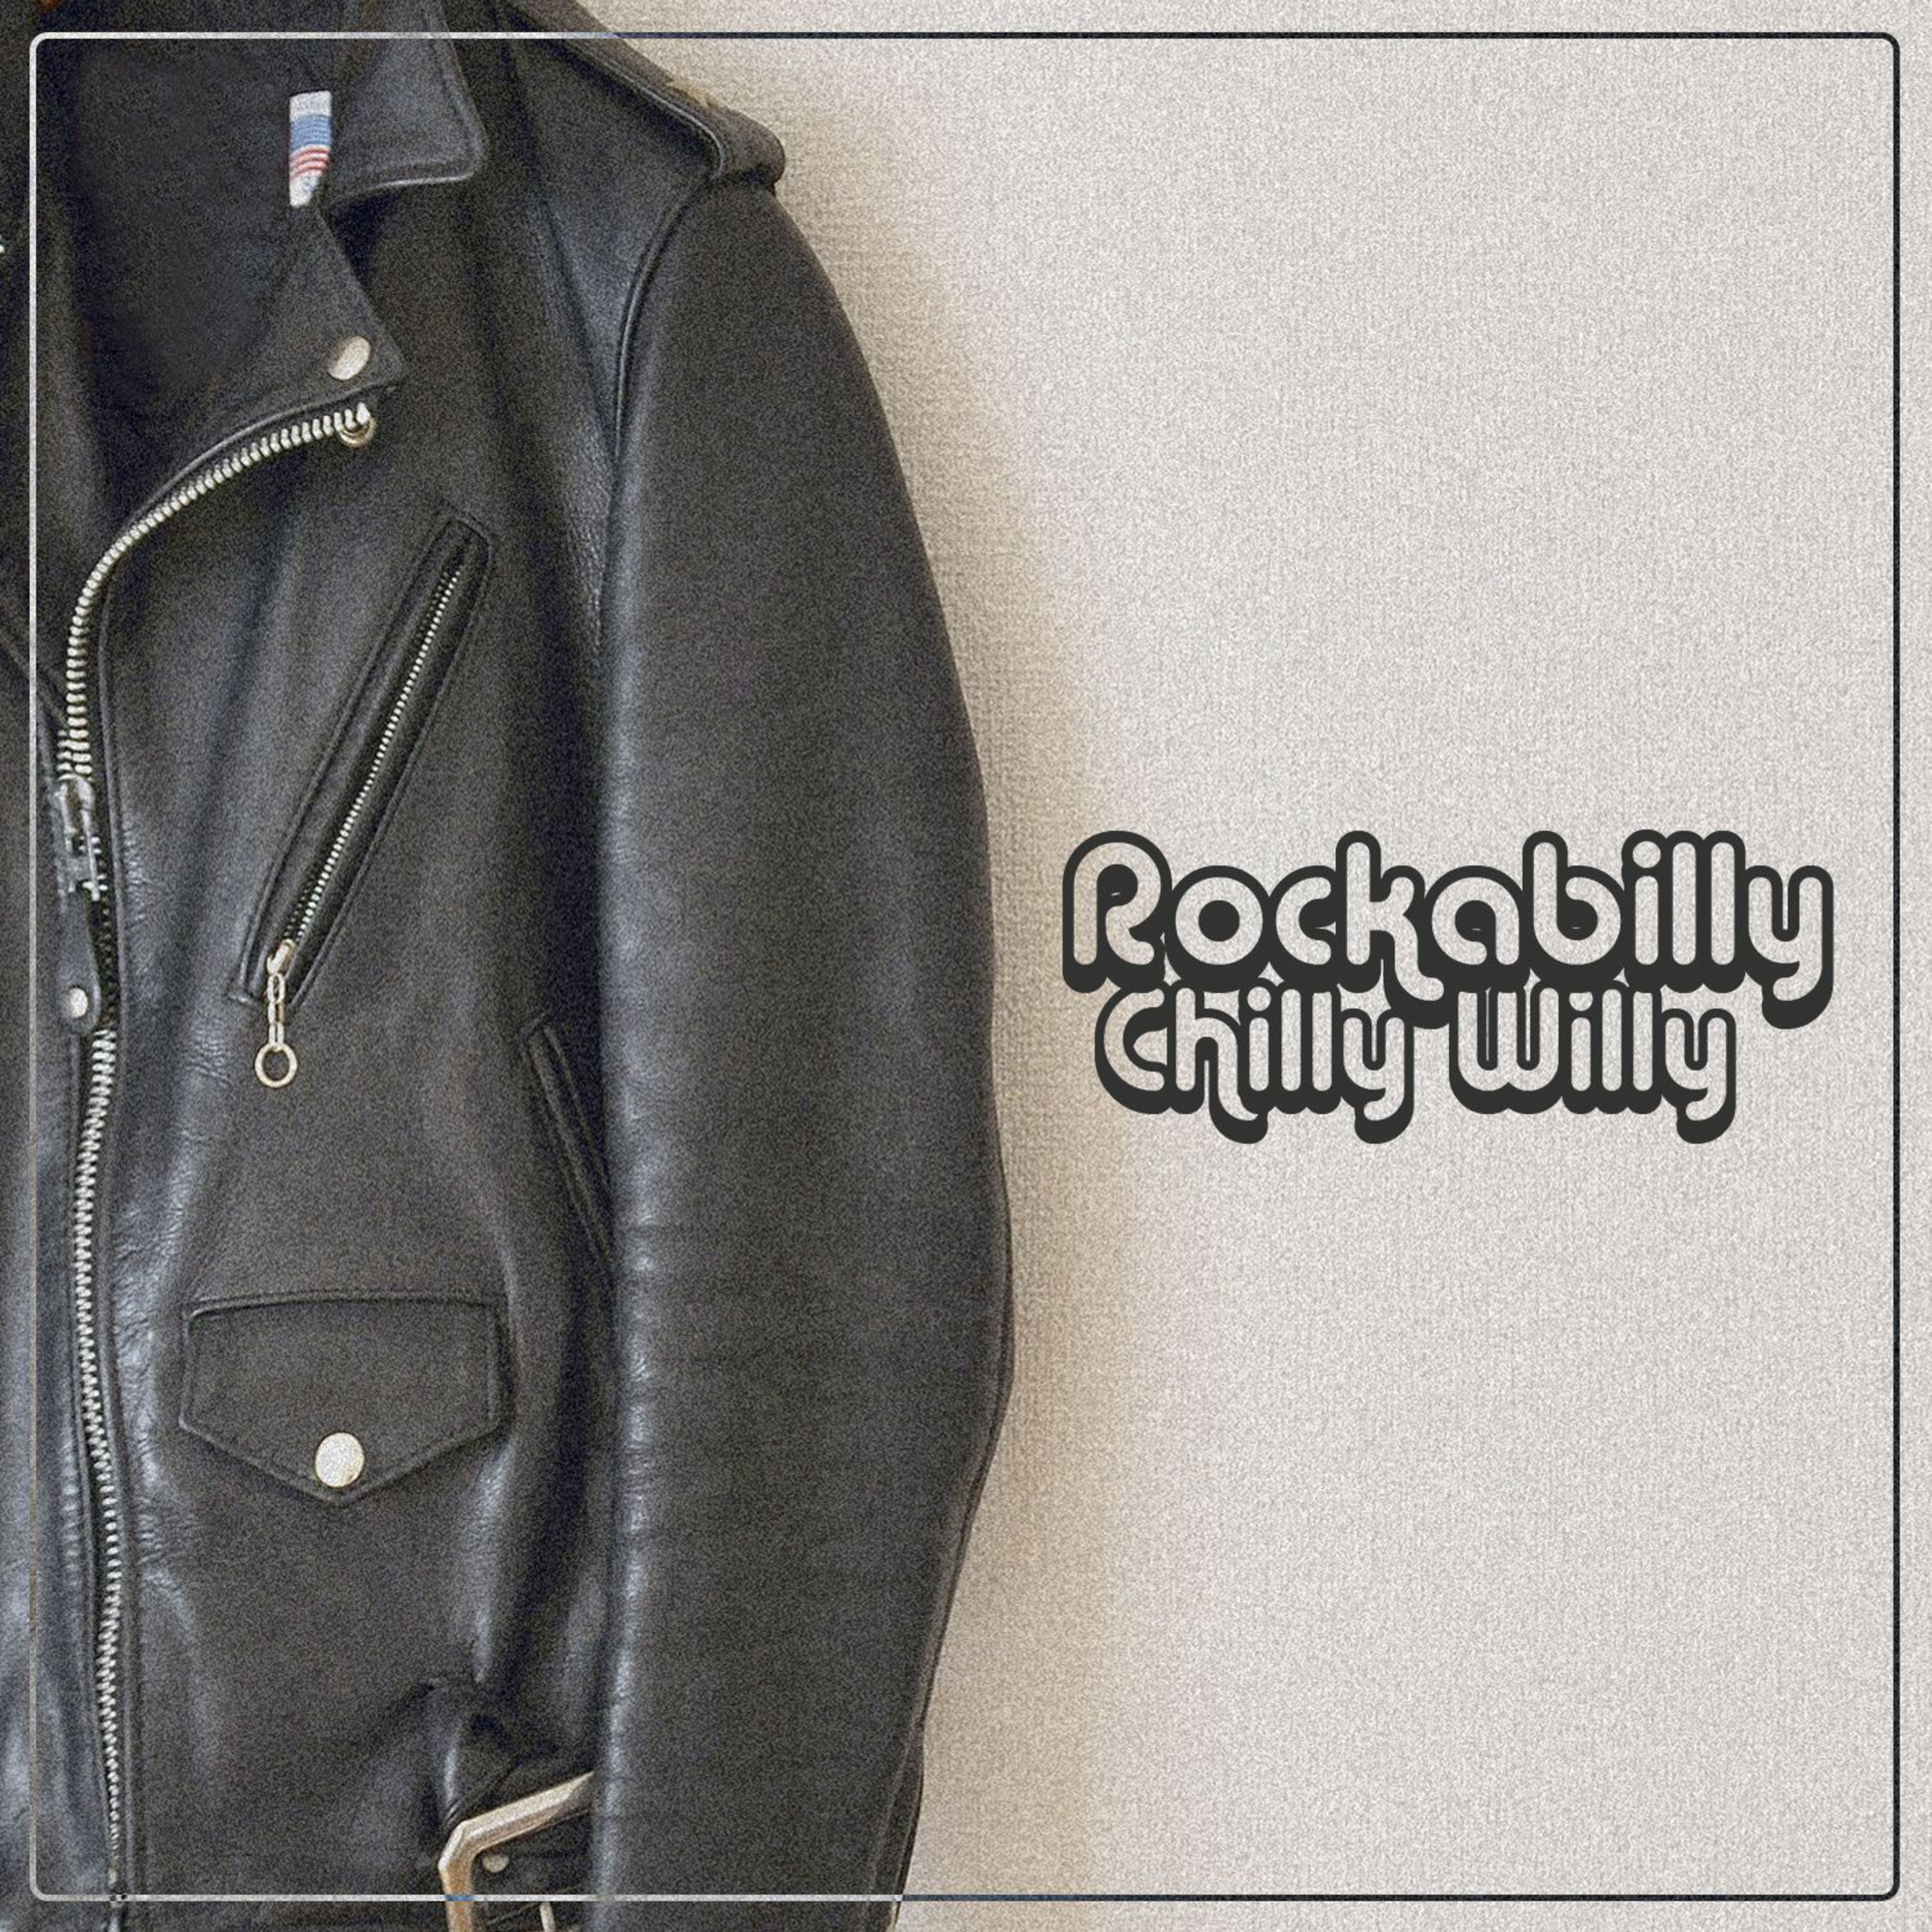 Rockabilly Chilly Willy